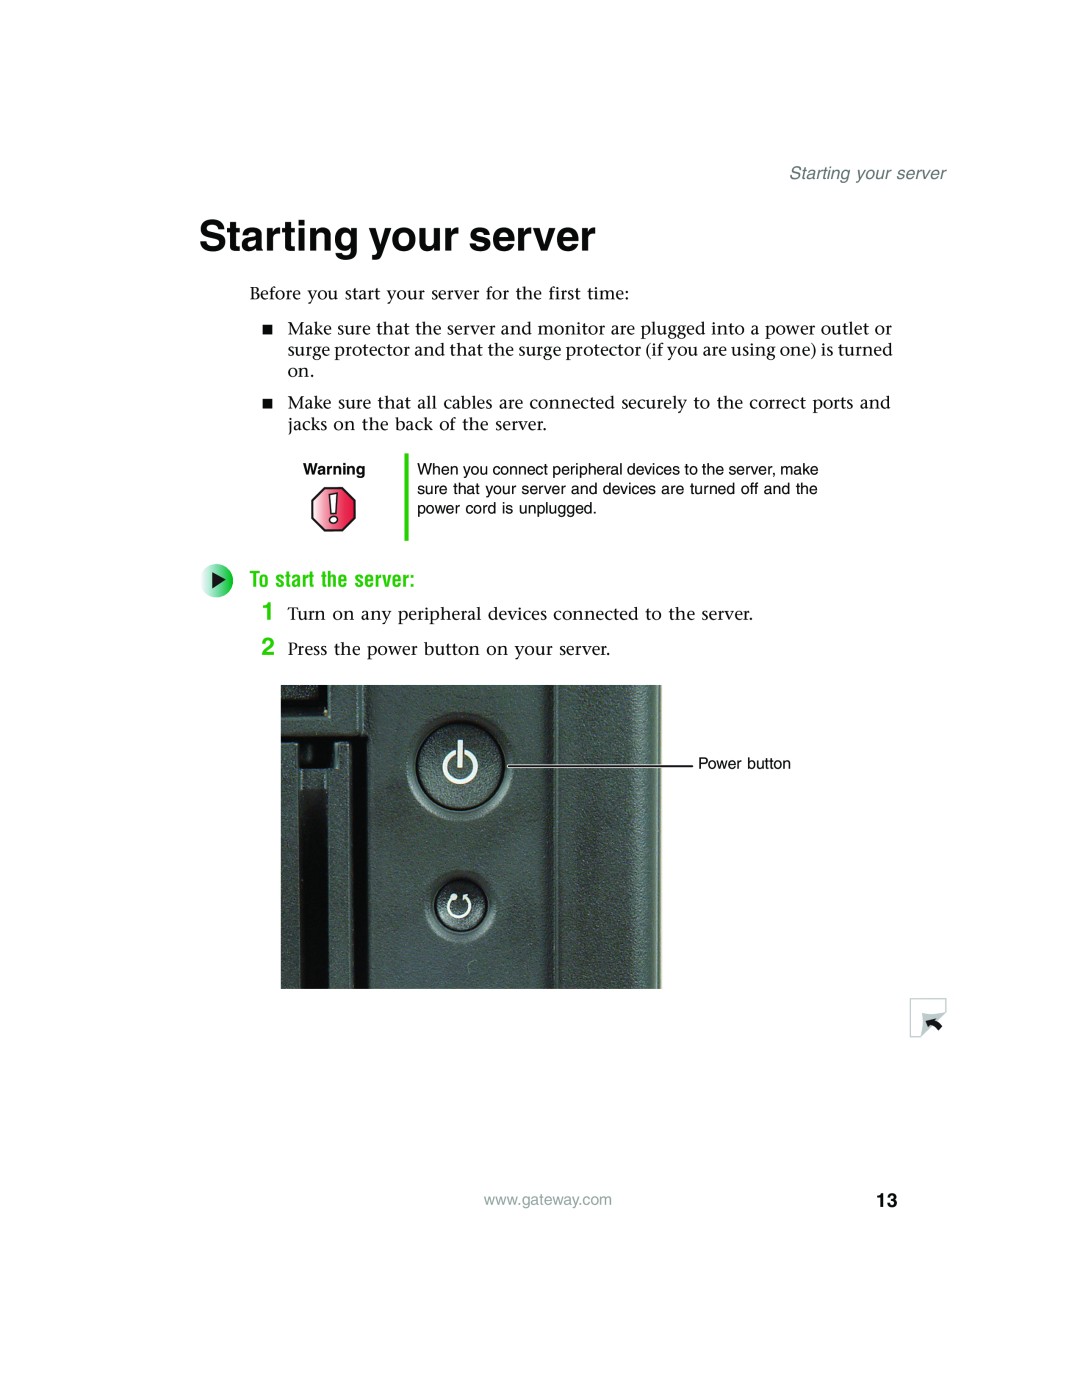 Gateway 960 manual Starting your server, To start the server 